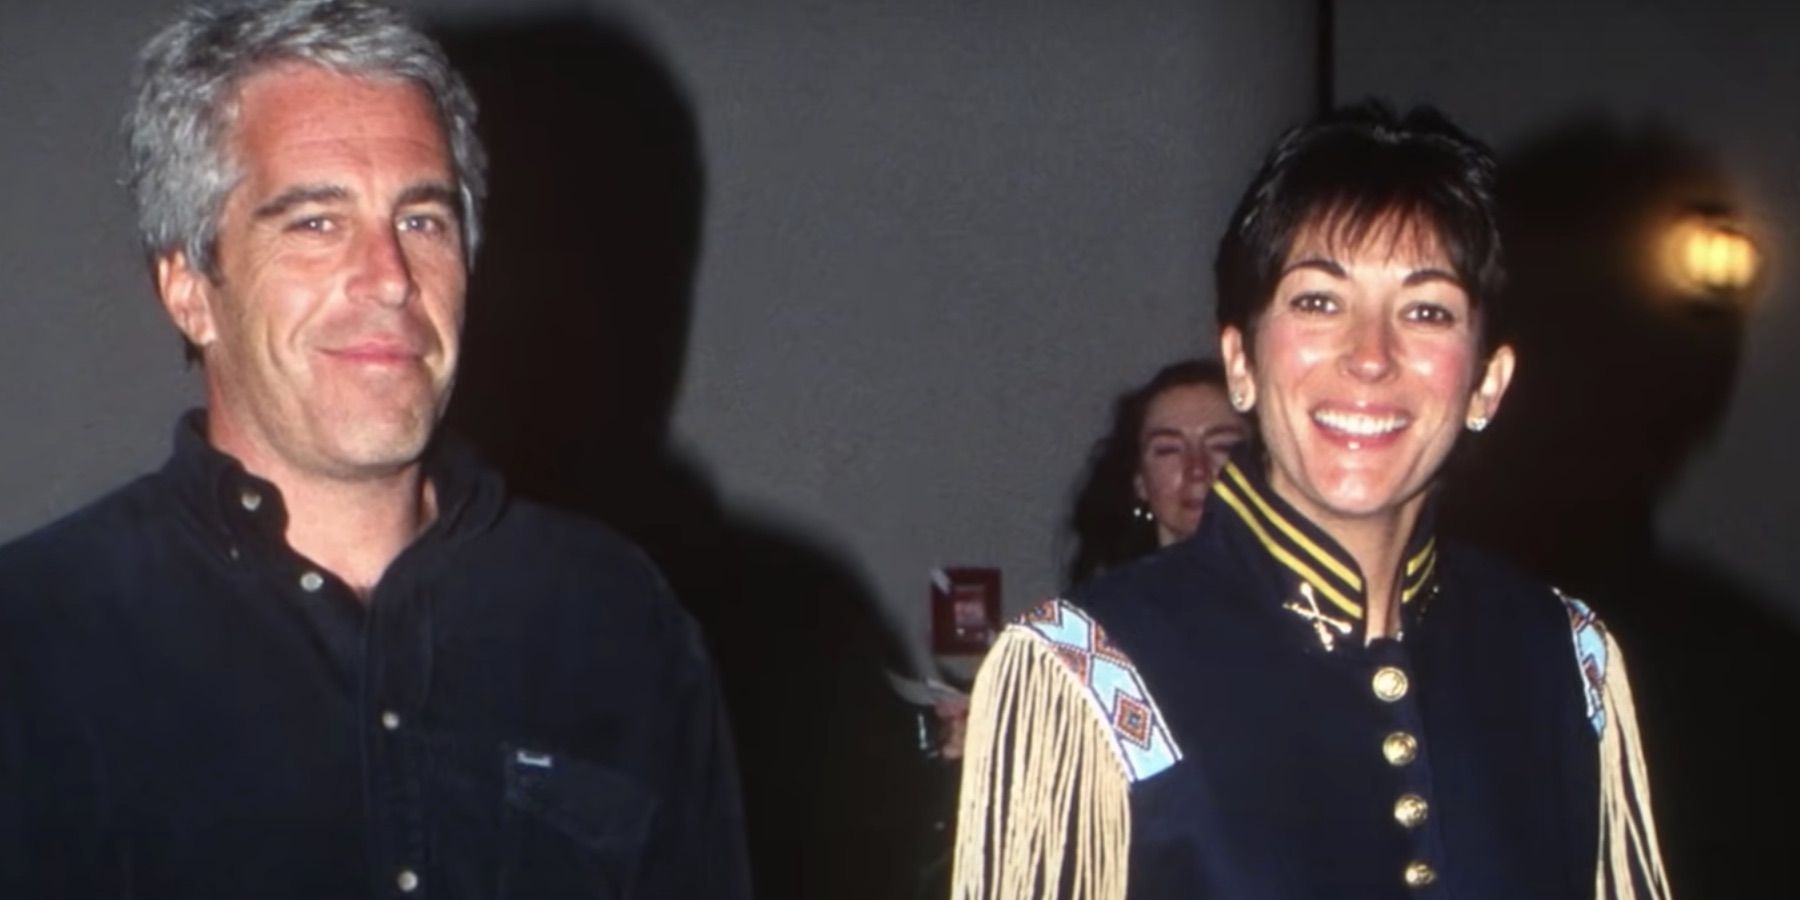 Ghislaine Maxwell pictured with Epstein, taken from official trailer for Epstein's Shadow.